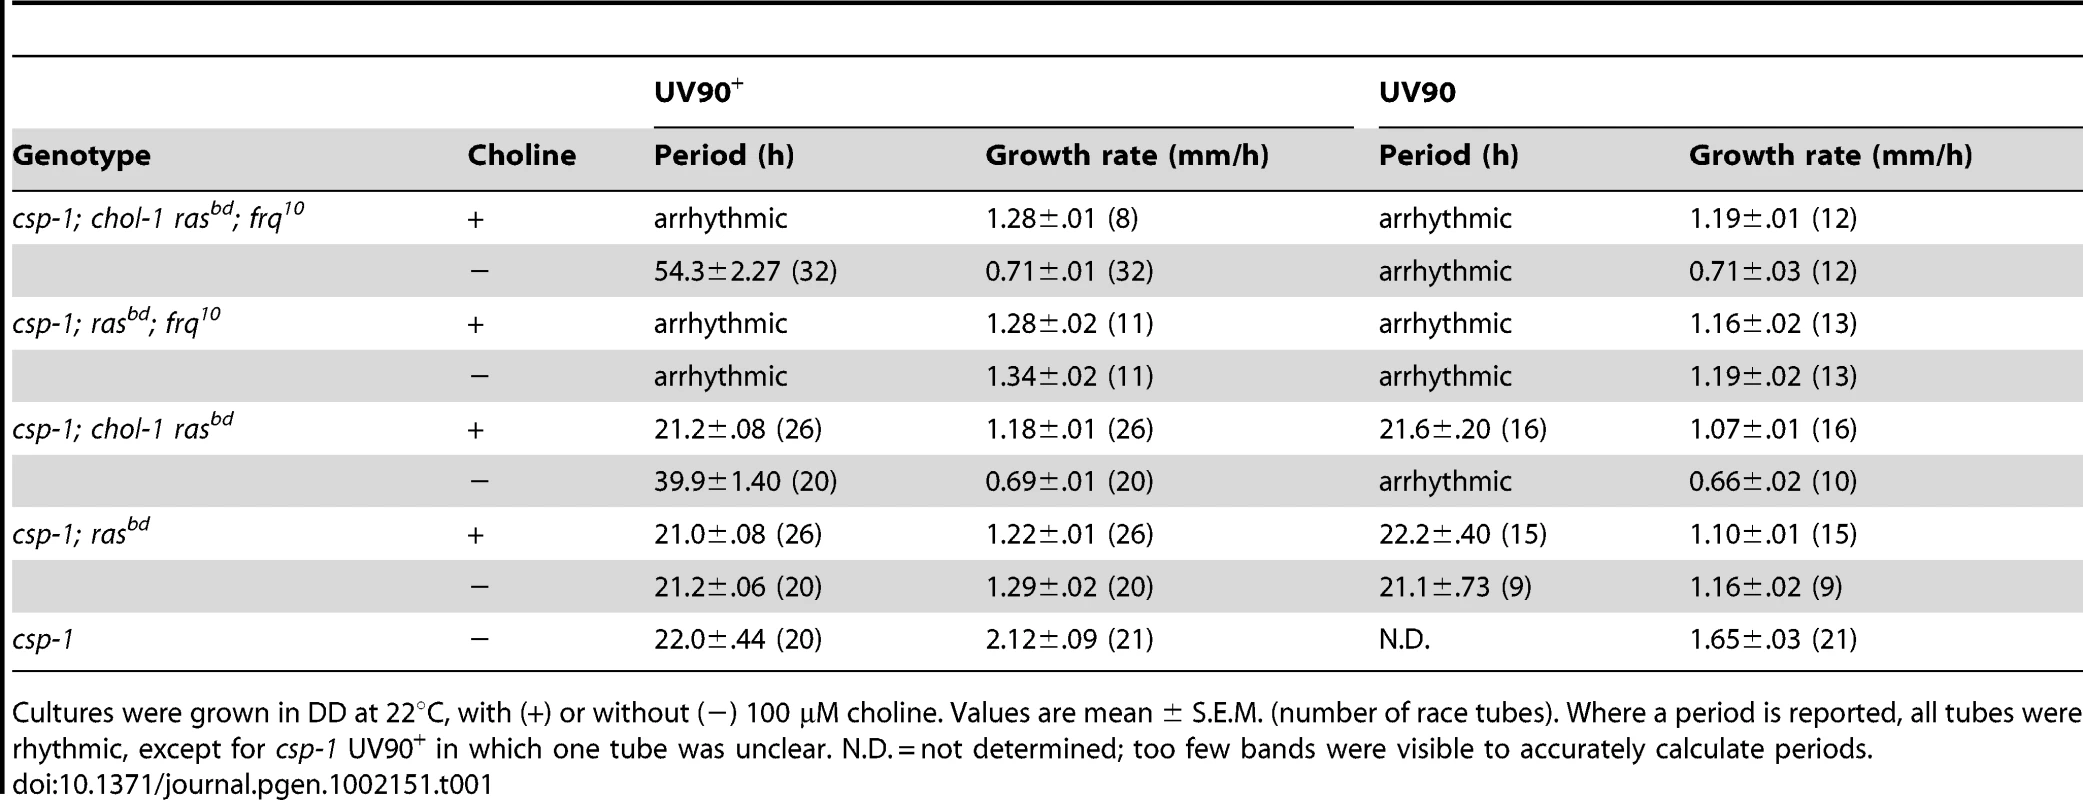 Periods and growth rates of UV90 wild-type and mutant strains.